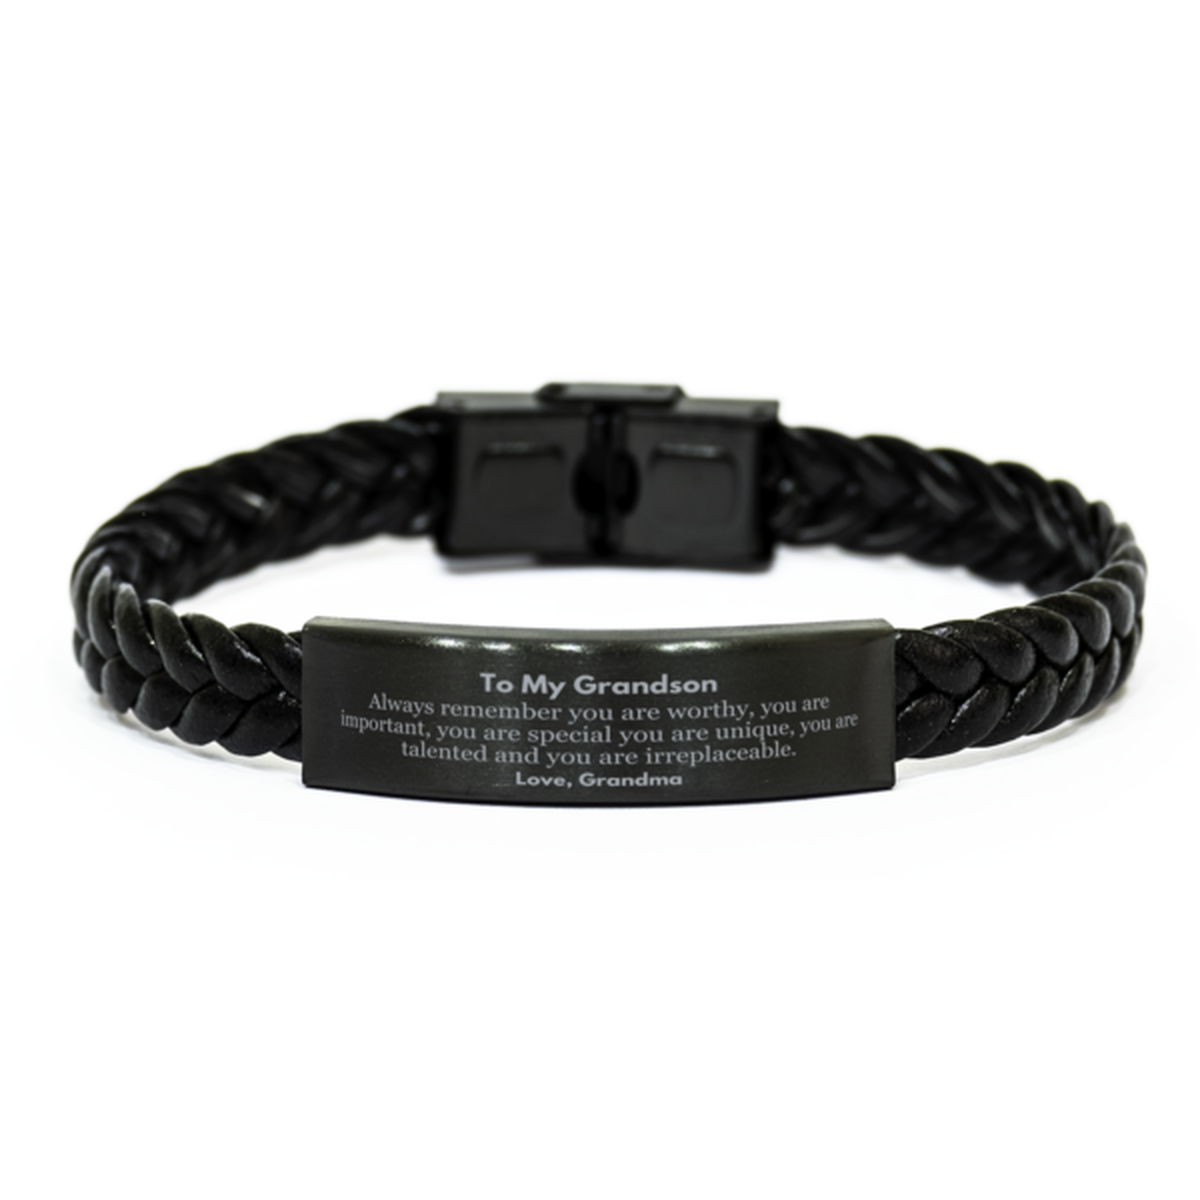 Grandson Birthday Gifts from Grandma, Inspirational Braided Leather Bracelet for Grandson Christmas Graduation Gifts for Grandson Always remember you are worthy, you are important. Love, Grandma